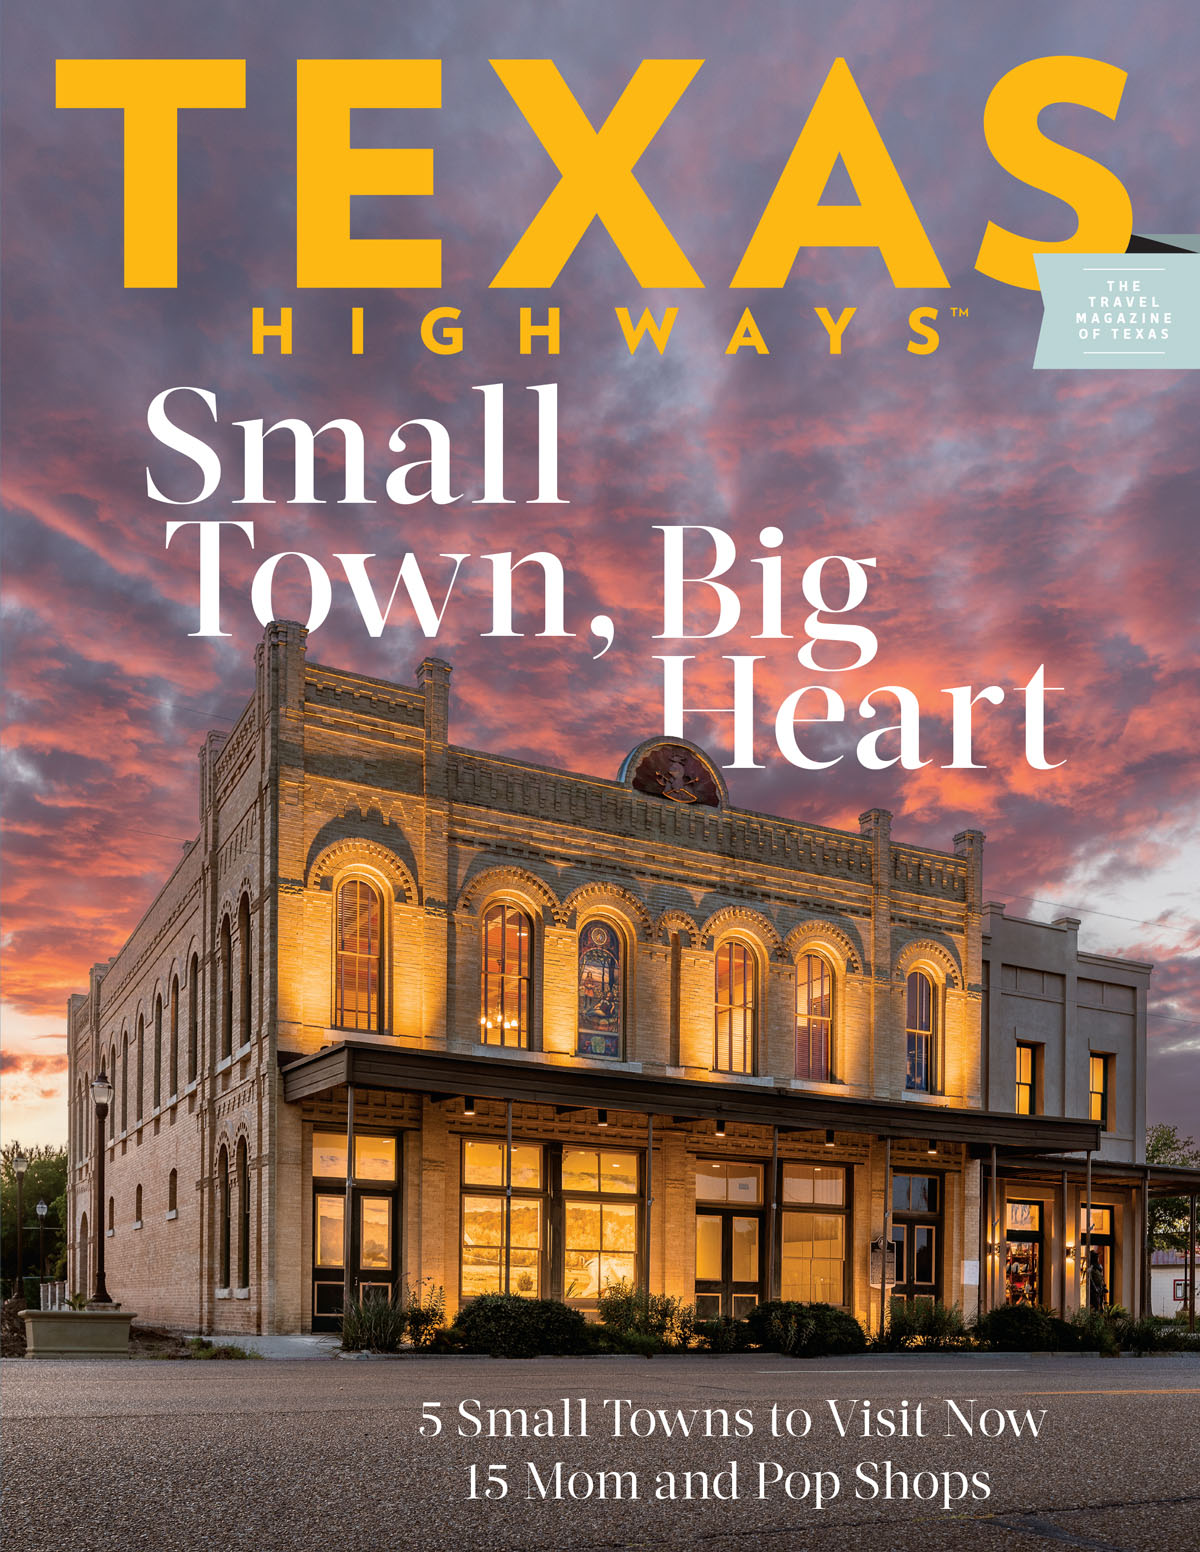 The August 2022 issue of Texas Highways Magazine